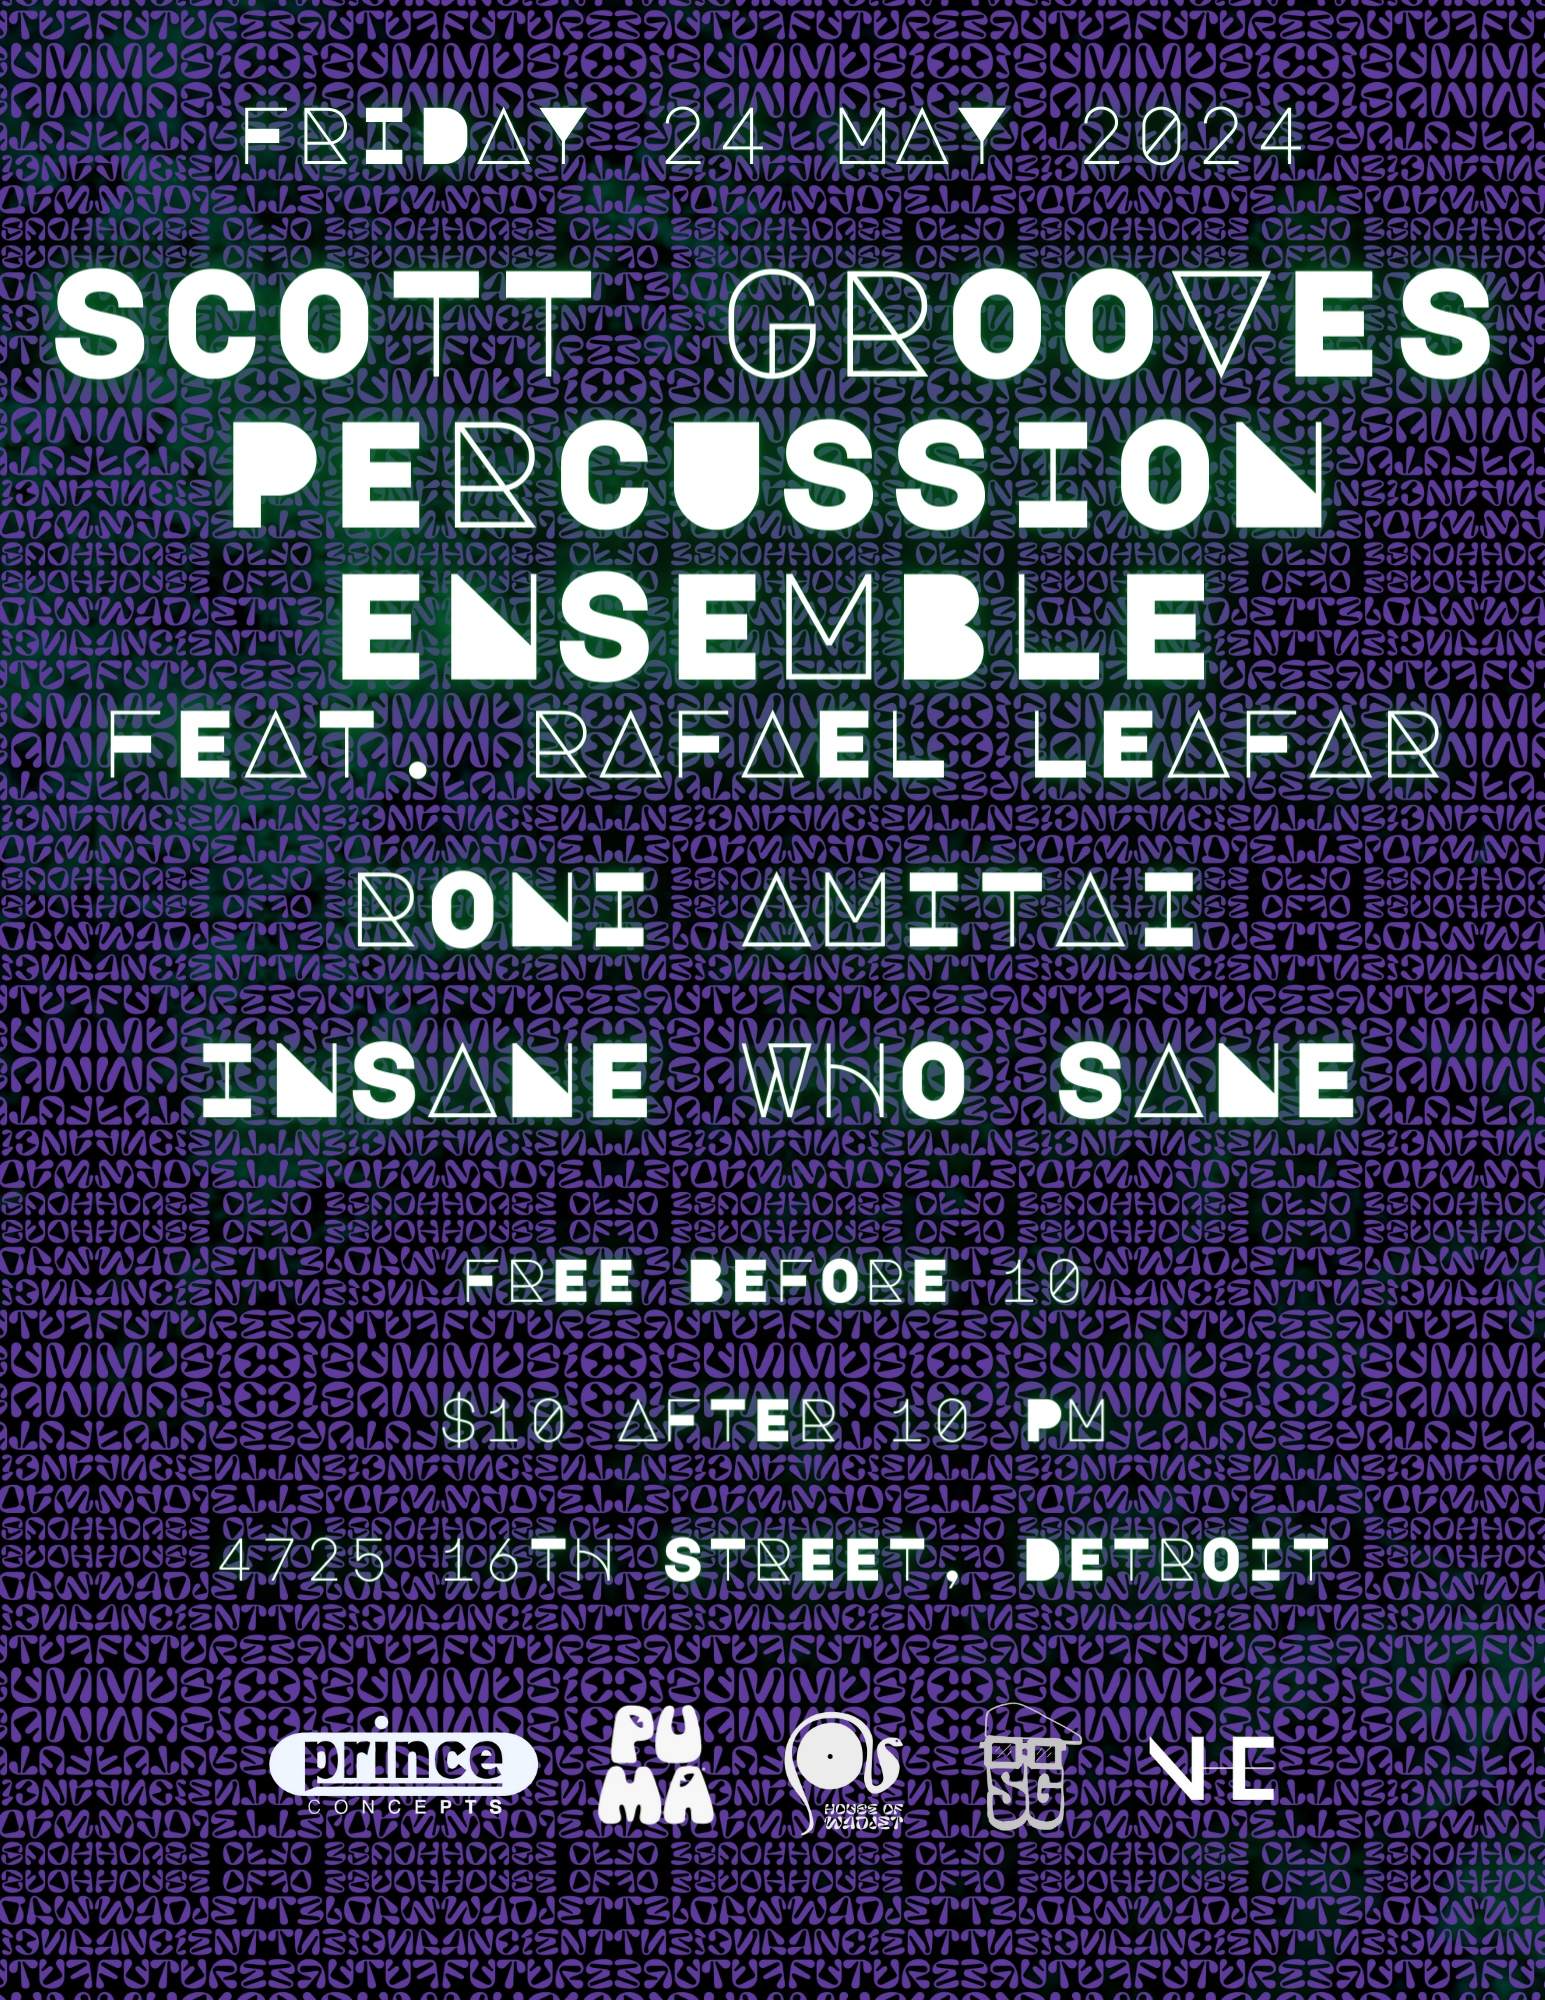 Movement Pre-party with Scott Grooves Live Percussion Ensemble featuring Rafael Leafar - Página frontal